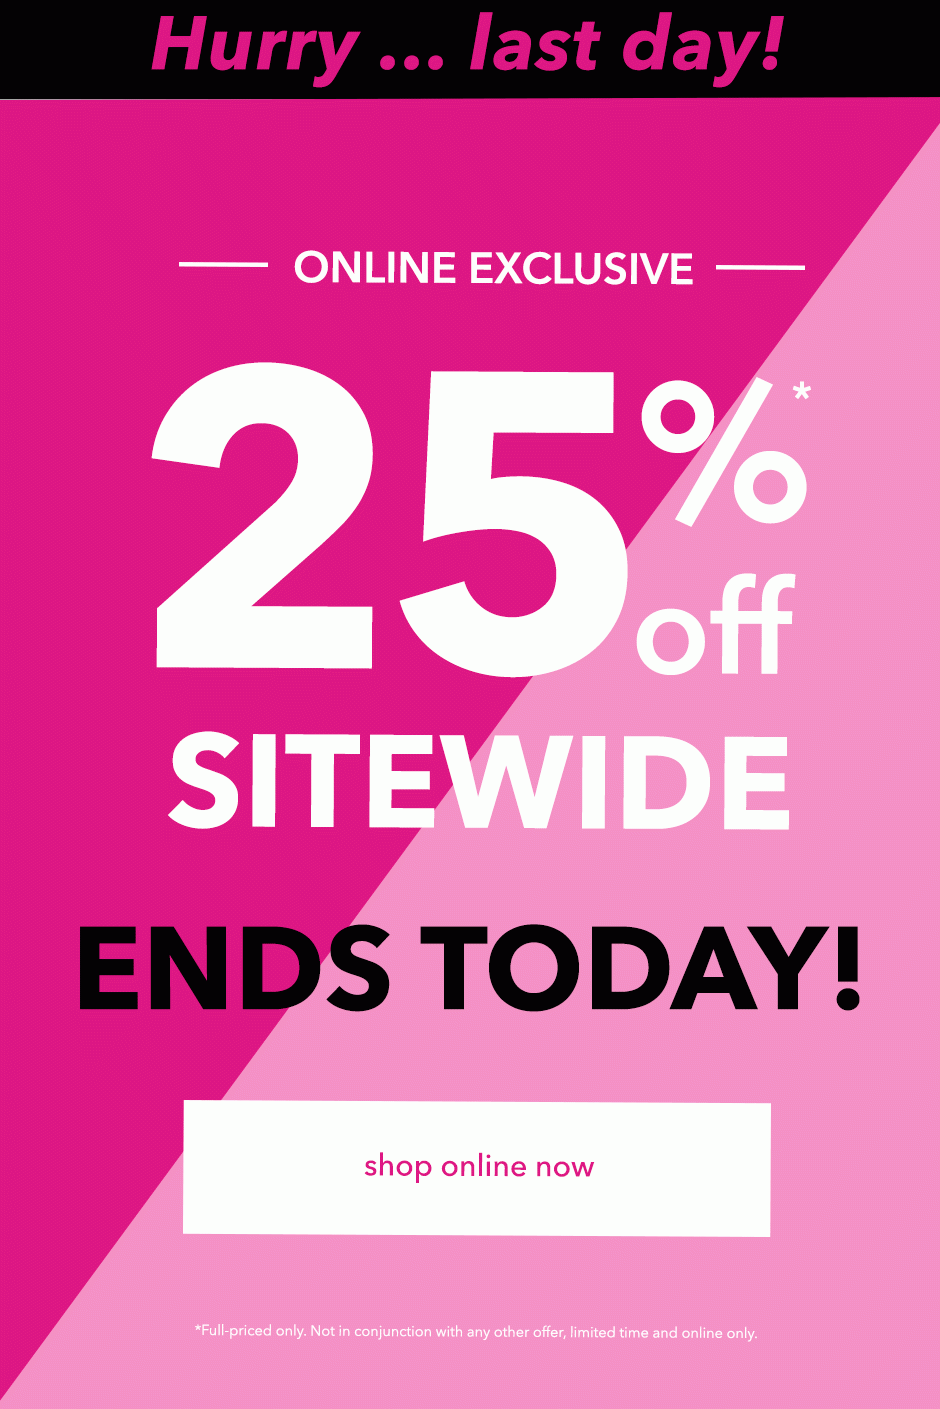 25% OFF SITEWIDE ENDS TODAY!